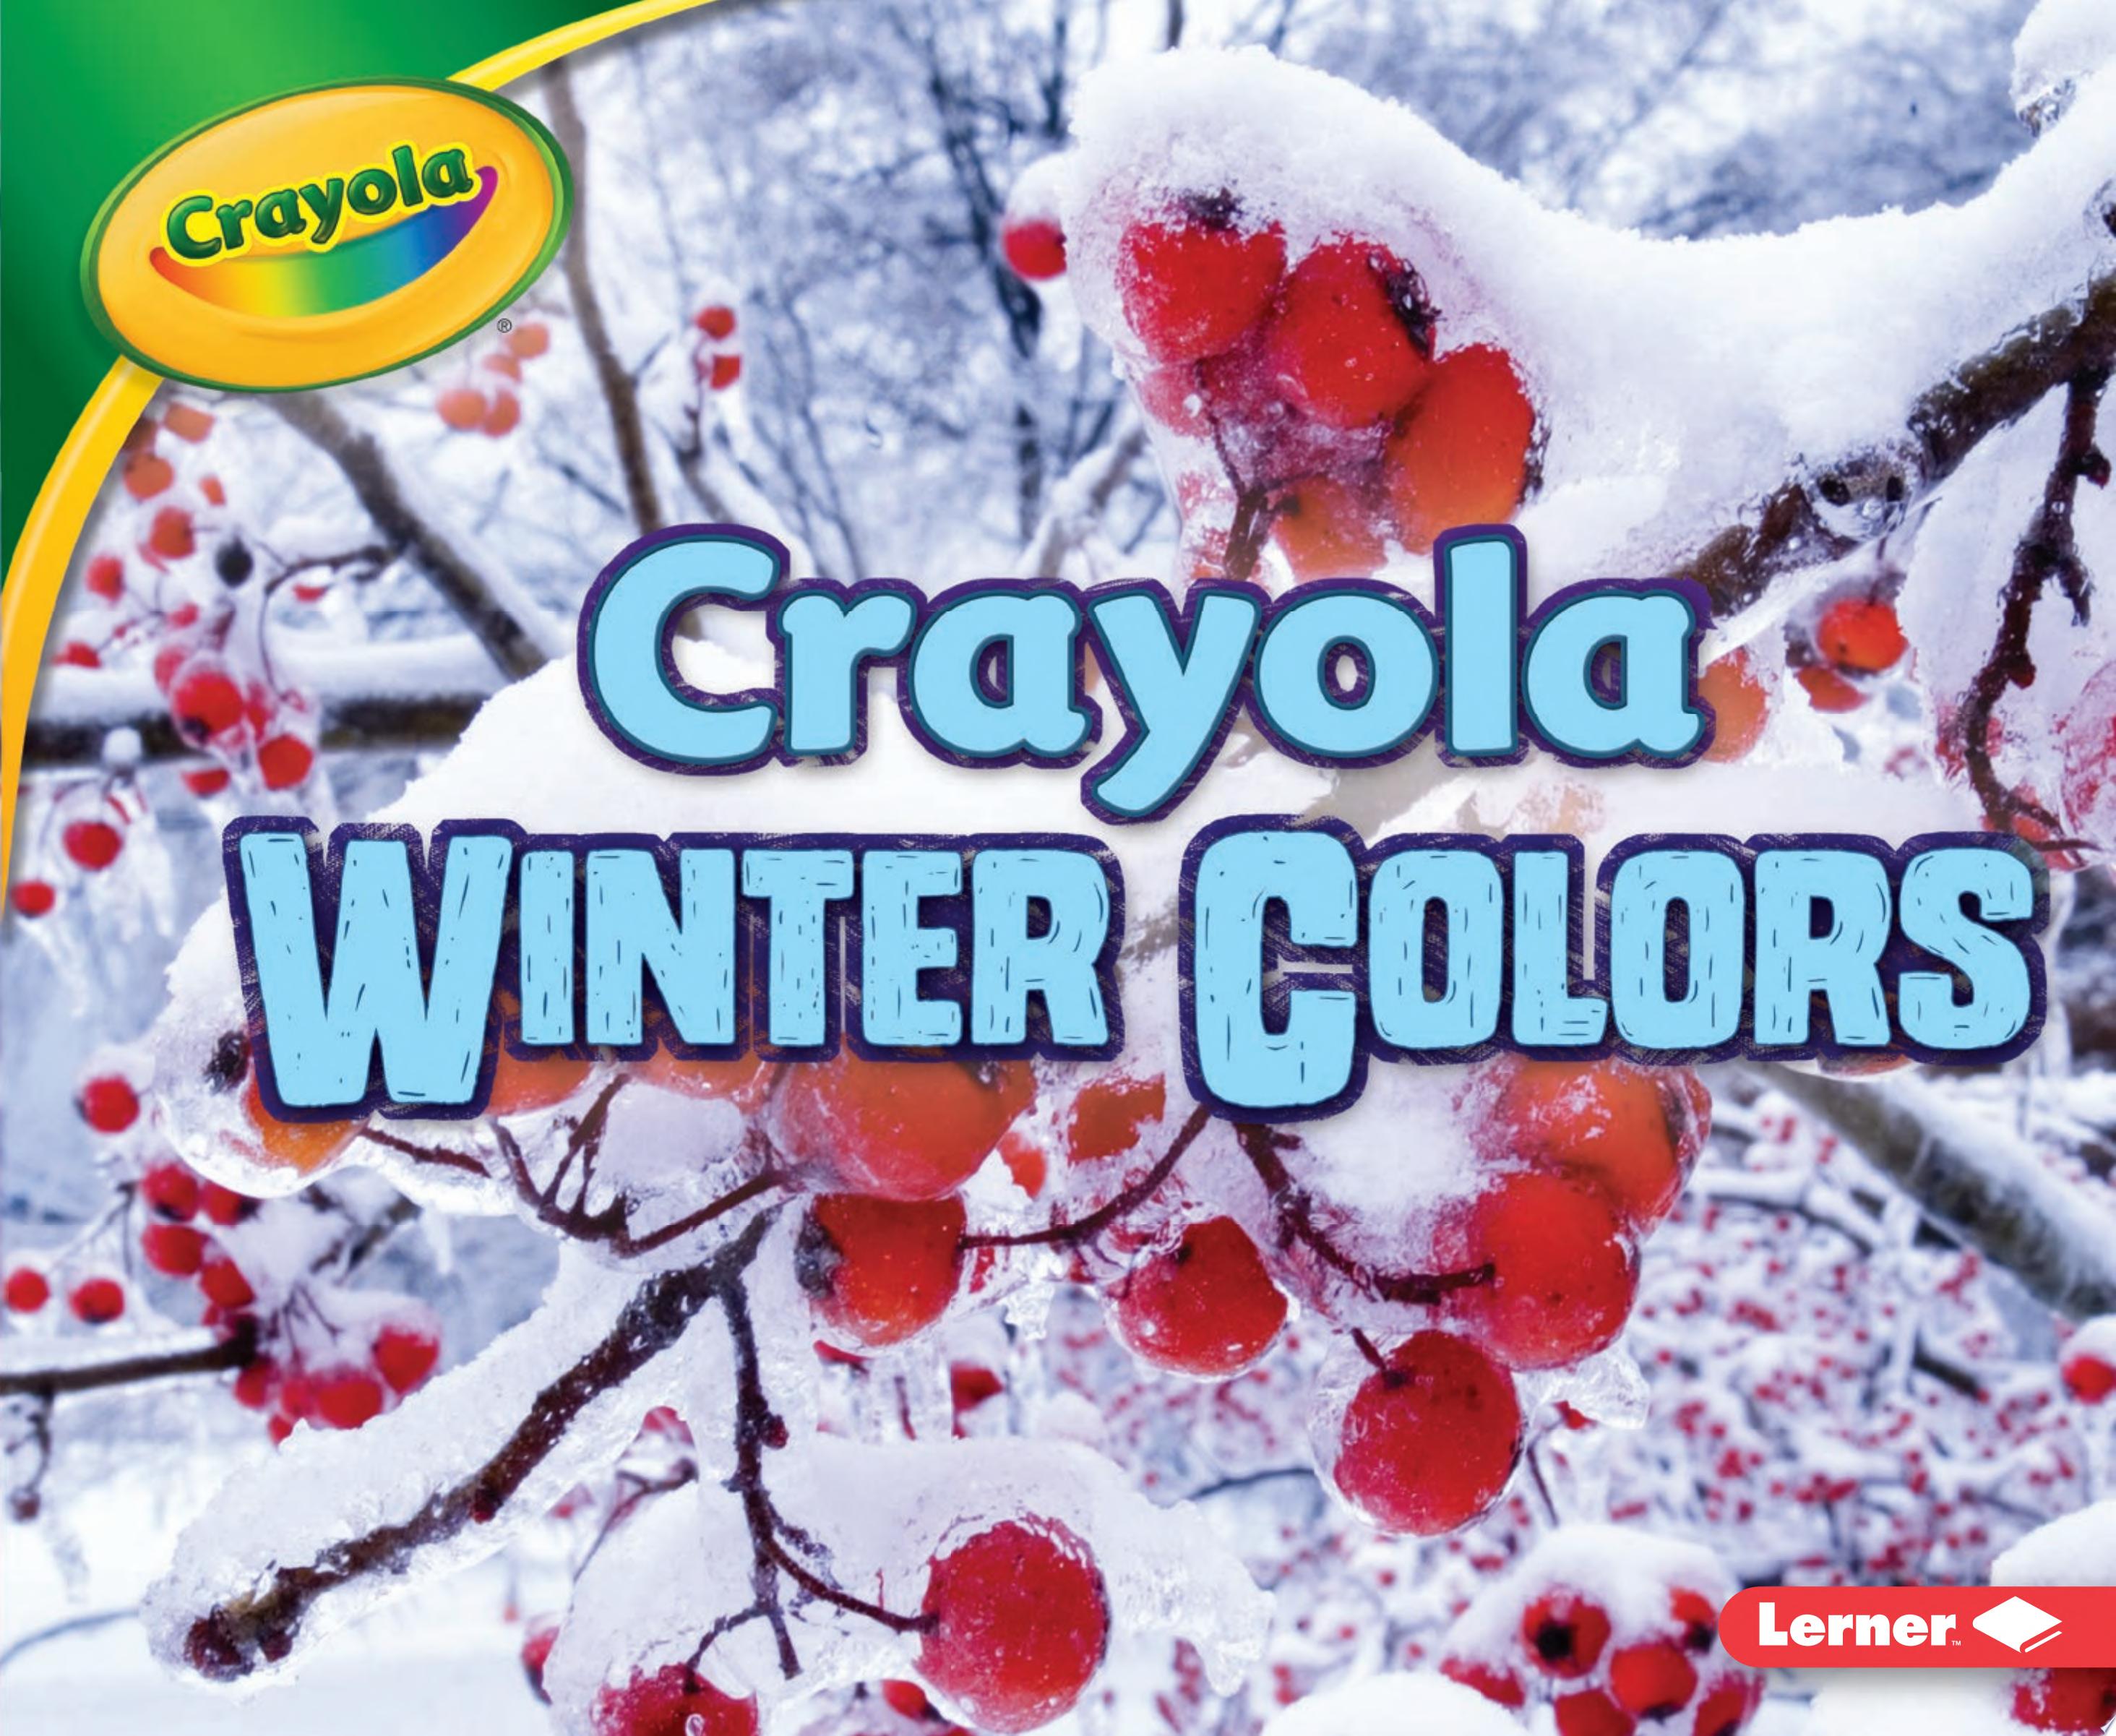 Image for "Crayola Winter Colors"